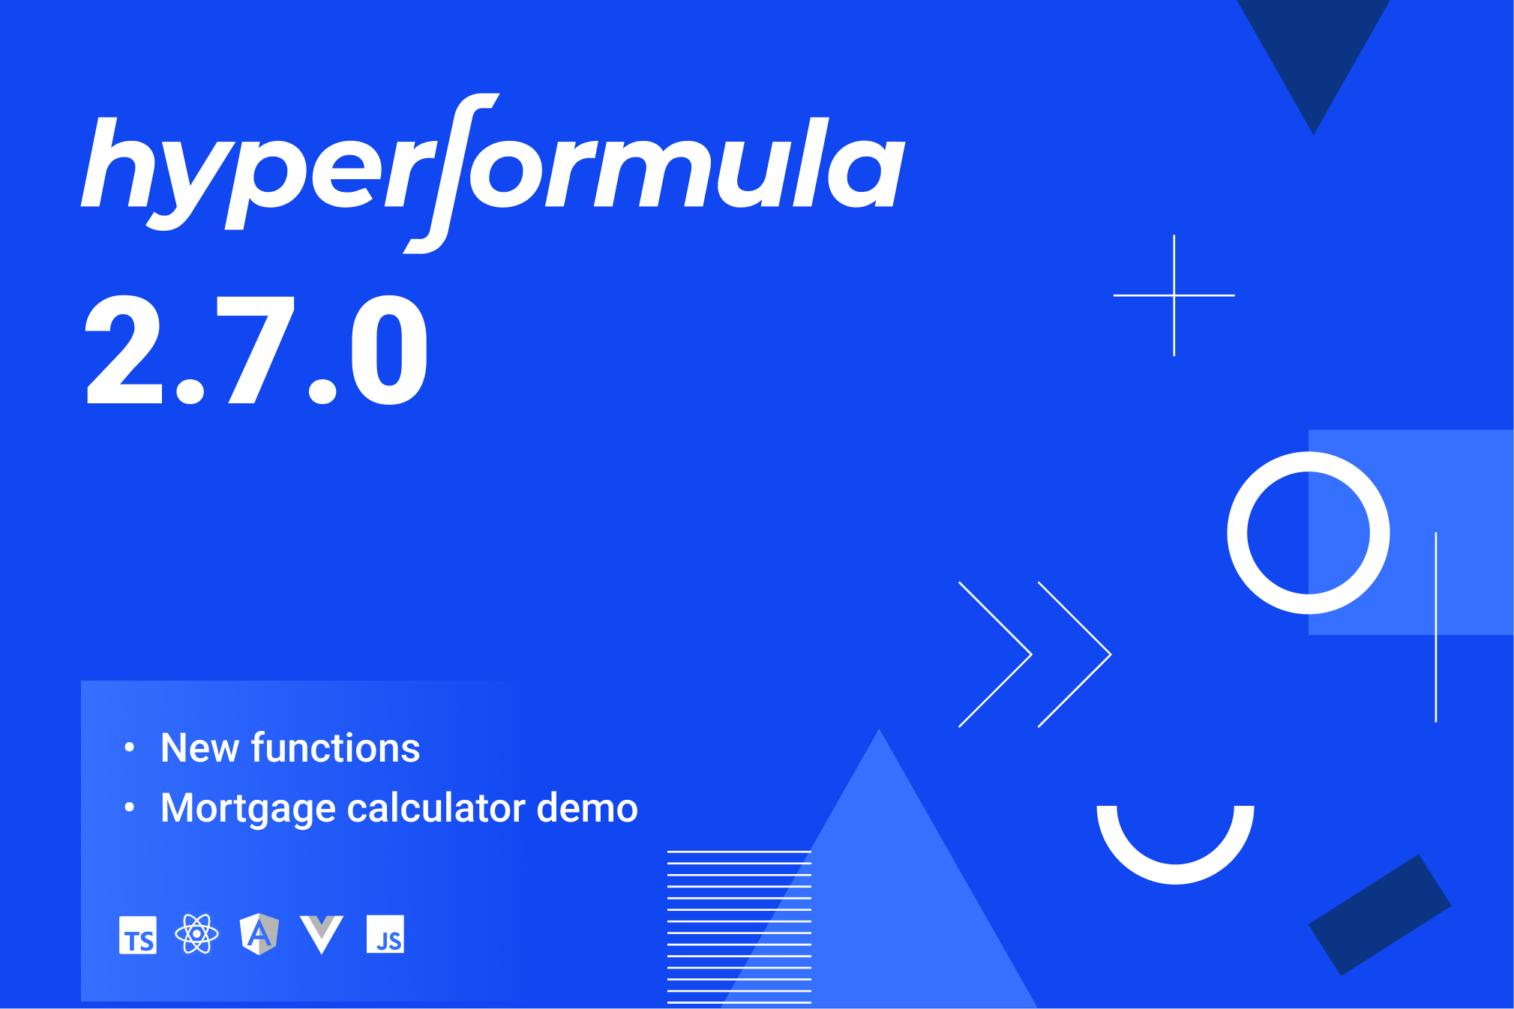 HyperFormula 2.7.0: New functions and mortgage calculator demo